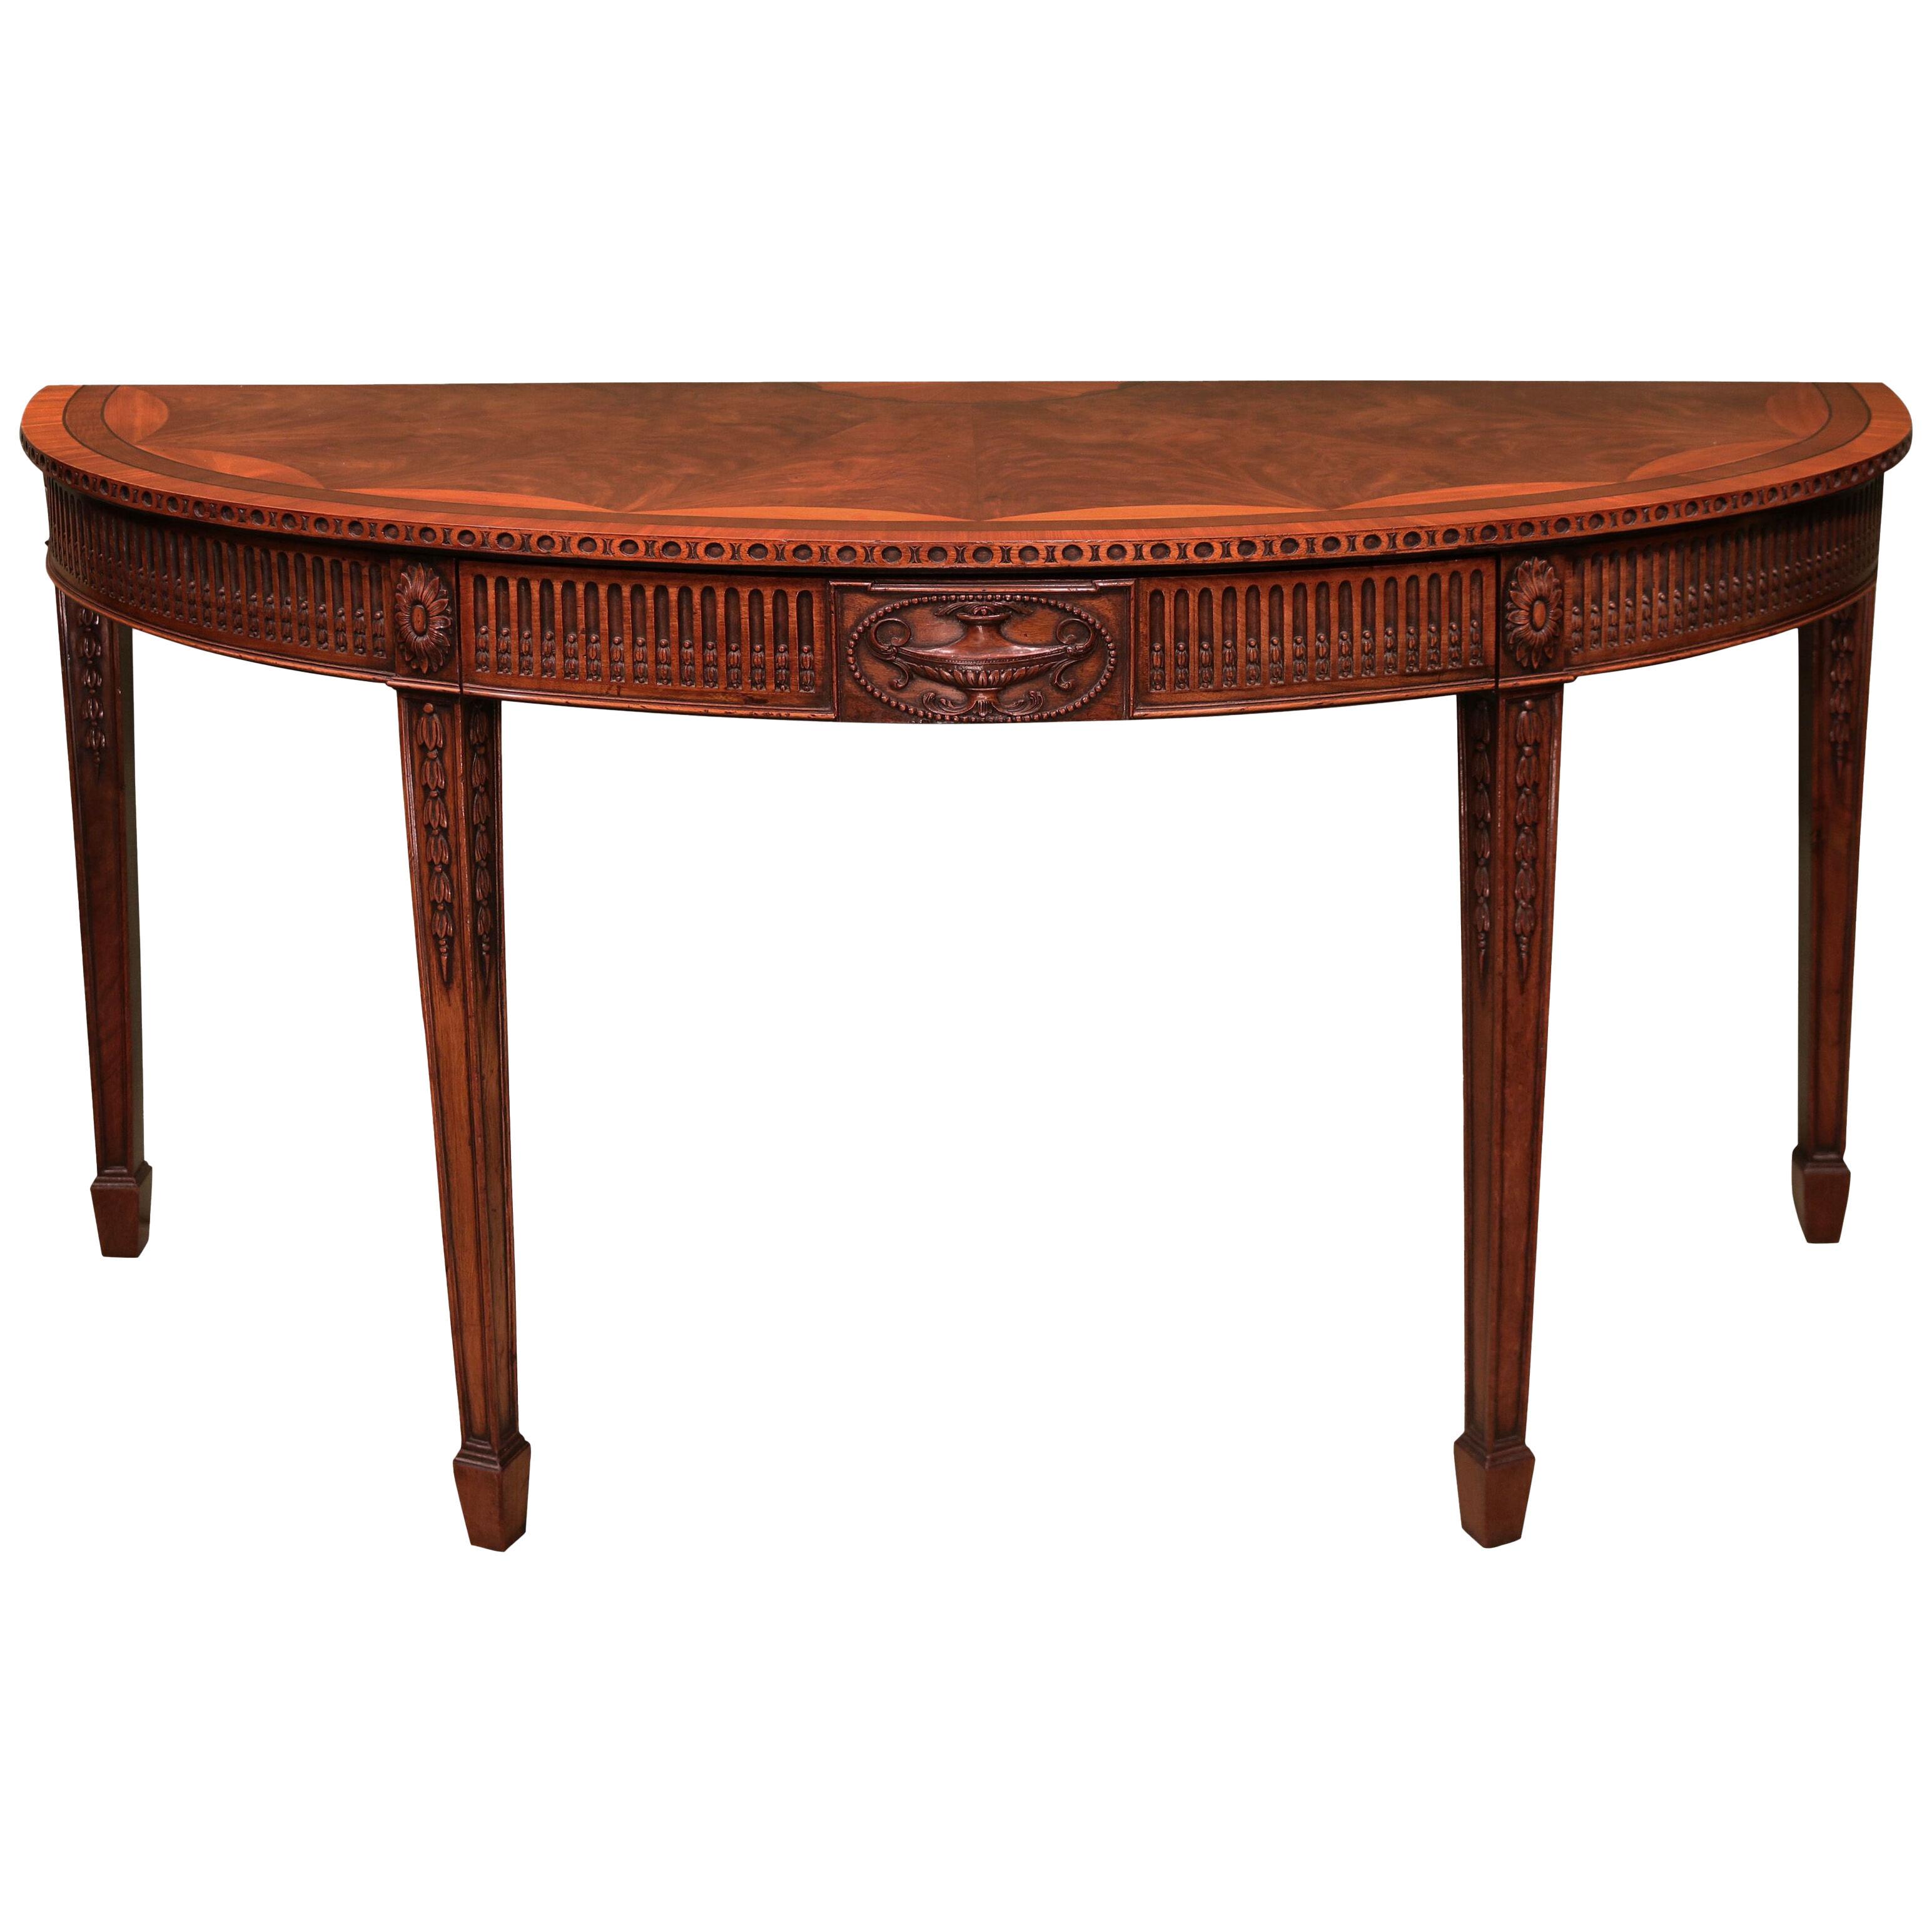 A 19th century Chippendale revival mahogany semi - elliptical serving table